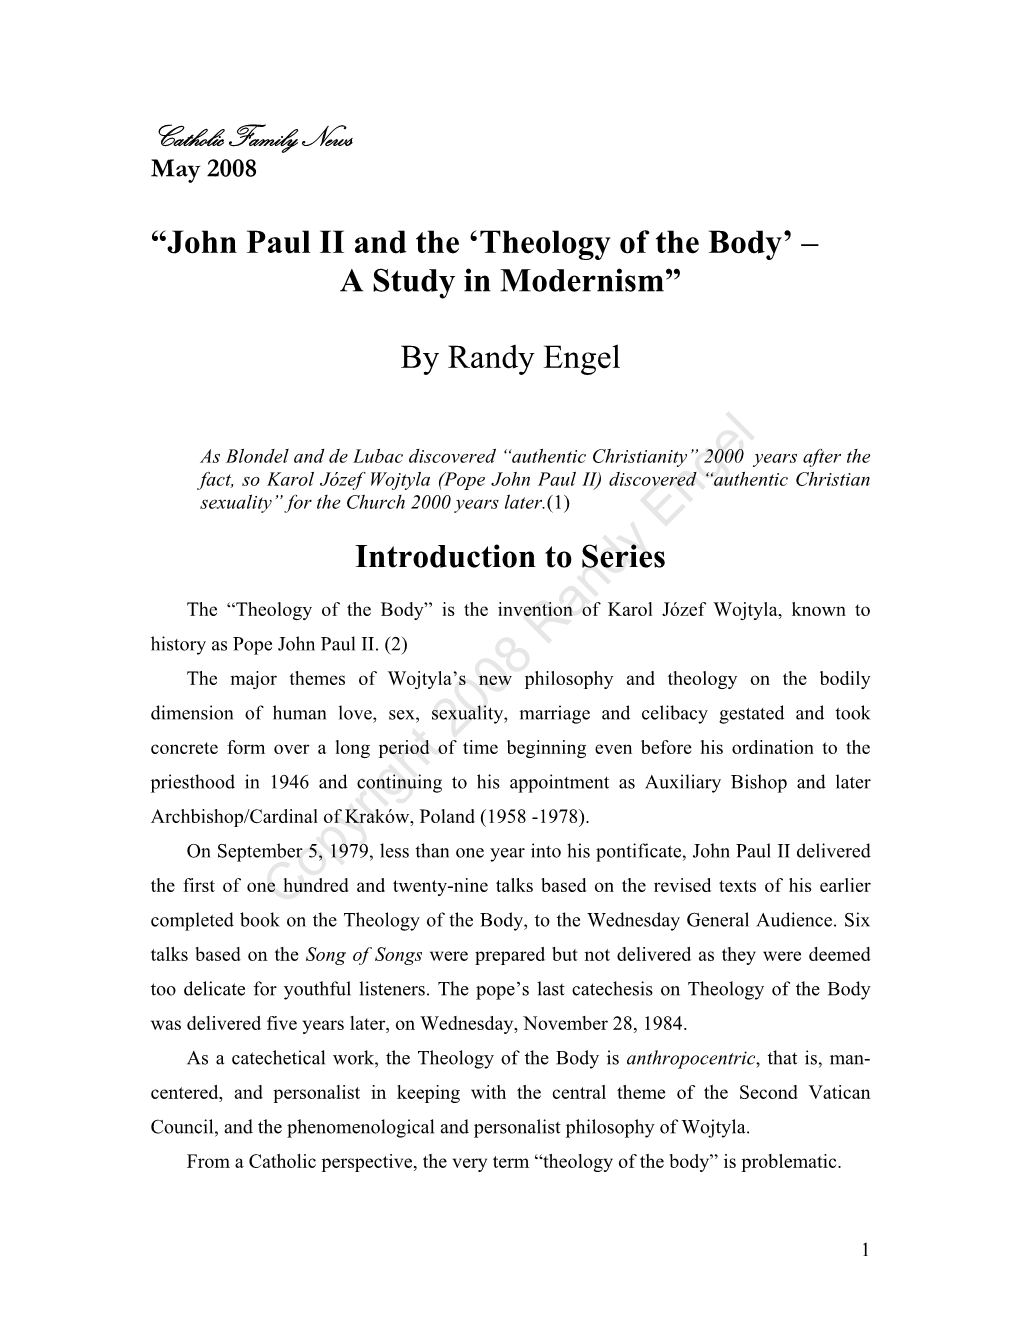 “'The Theology of the Body'